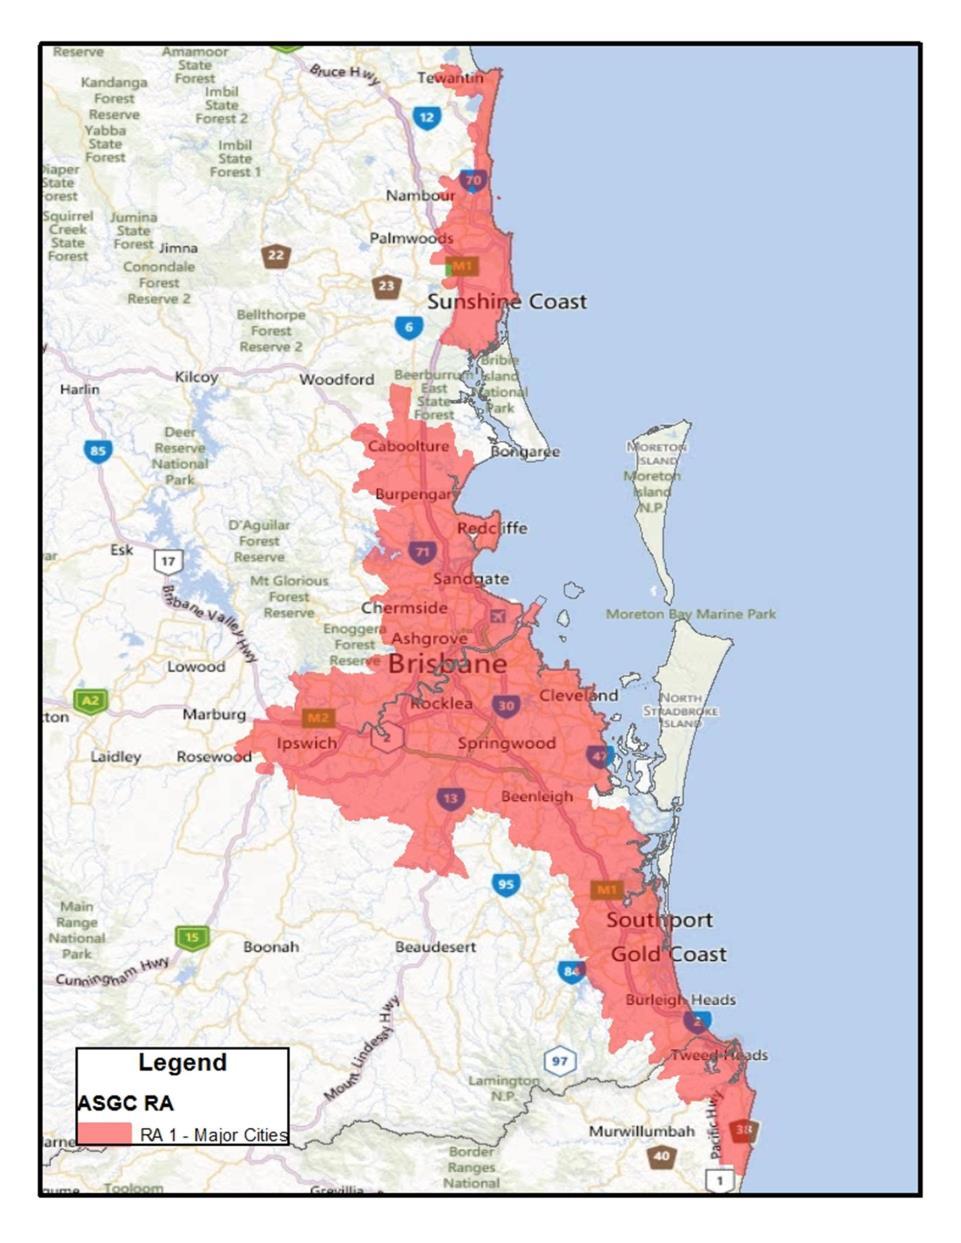 Brisbane RA1 (Medicare eligibility) area I If a patient is located